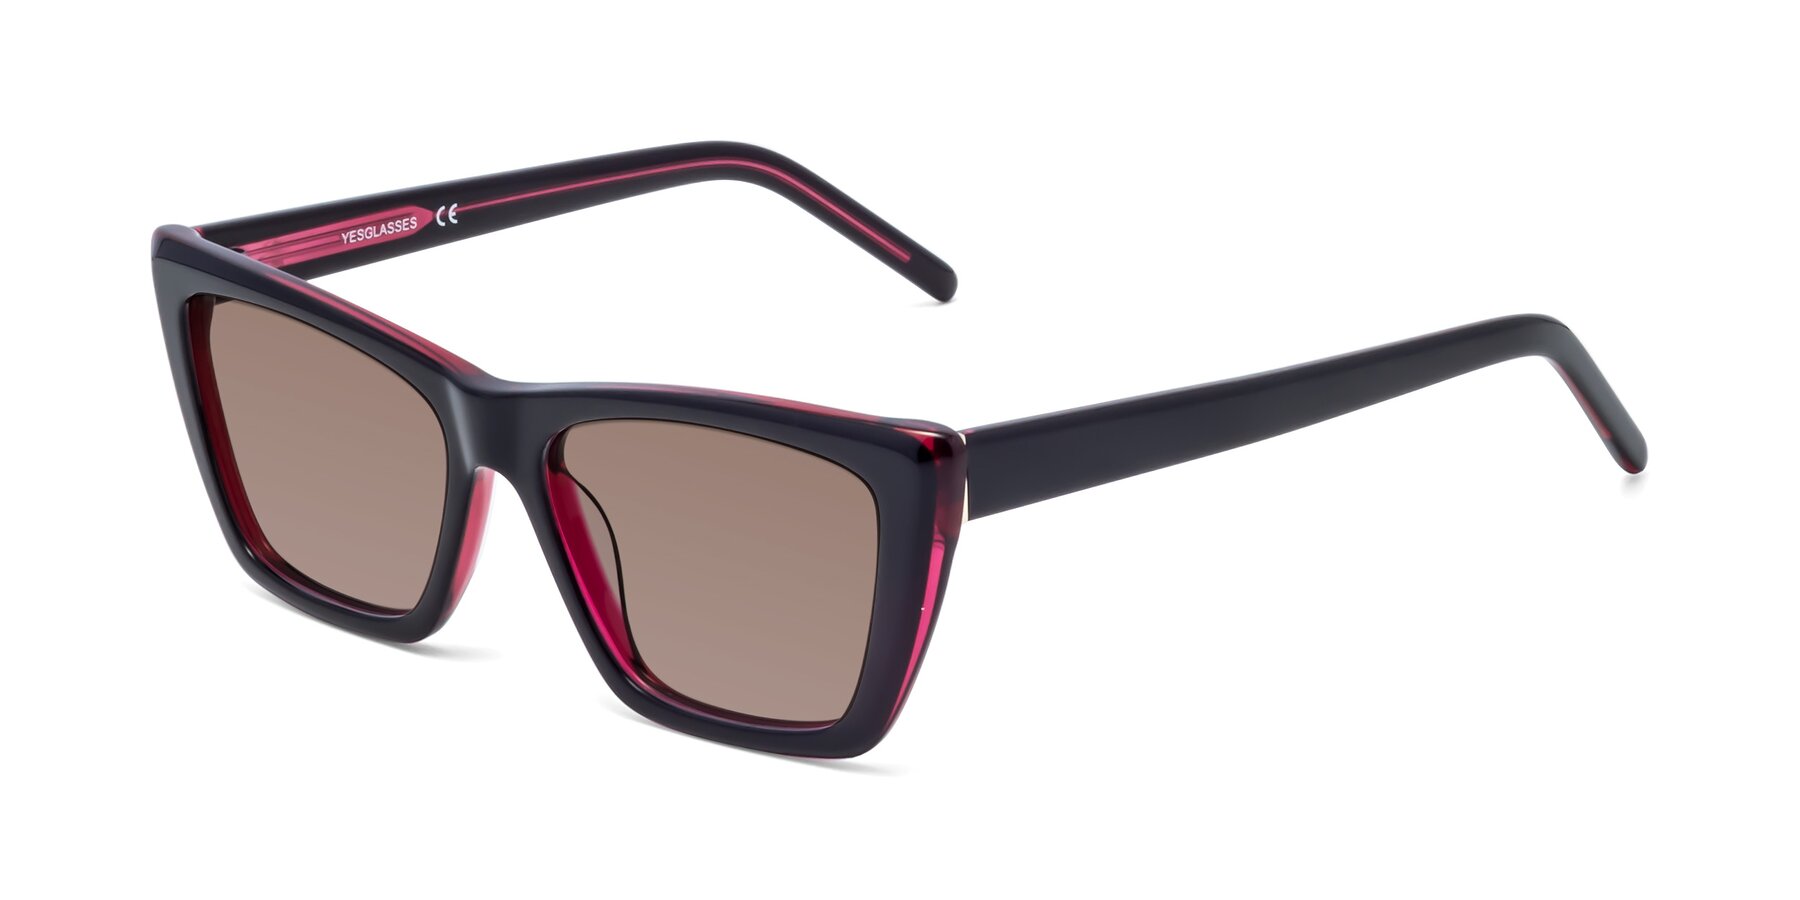 Angle of 1494 in Black-Wine with Medium Brown Tinted Lenses